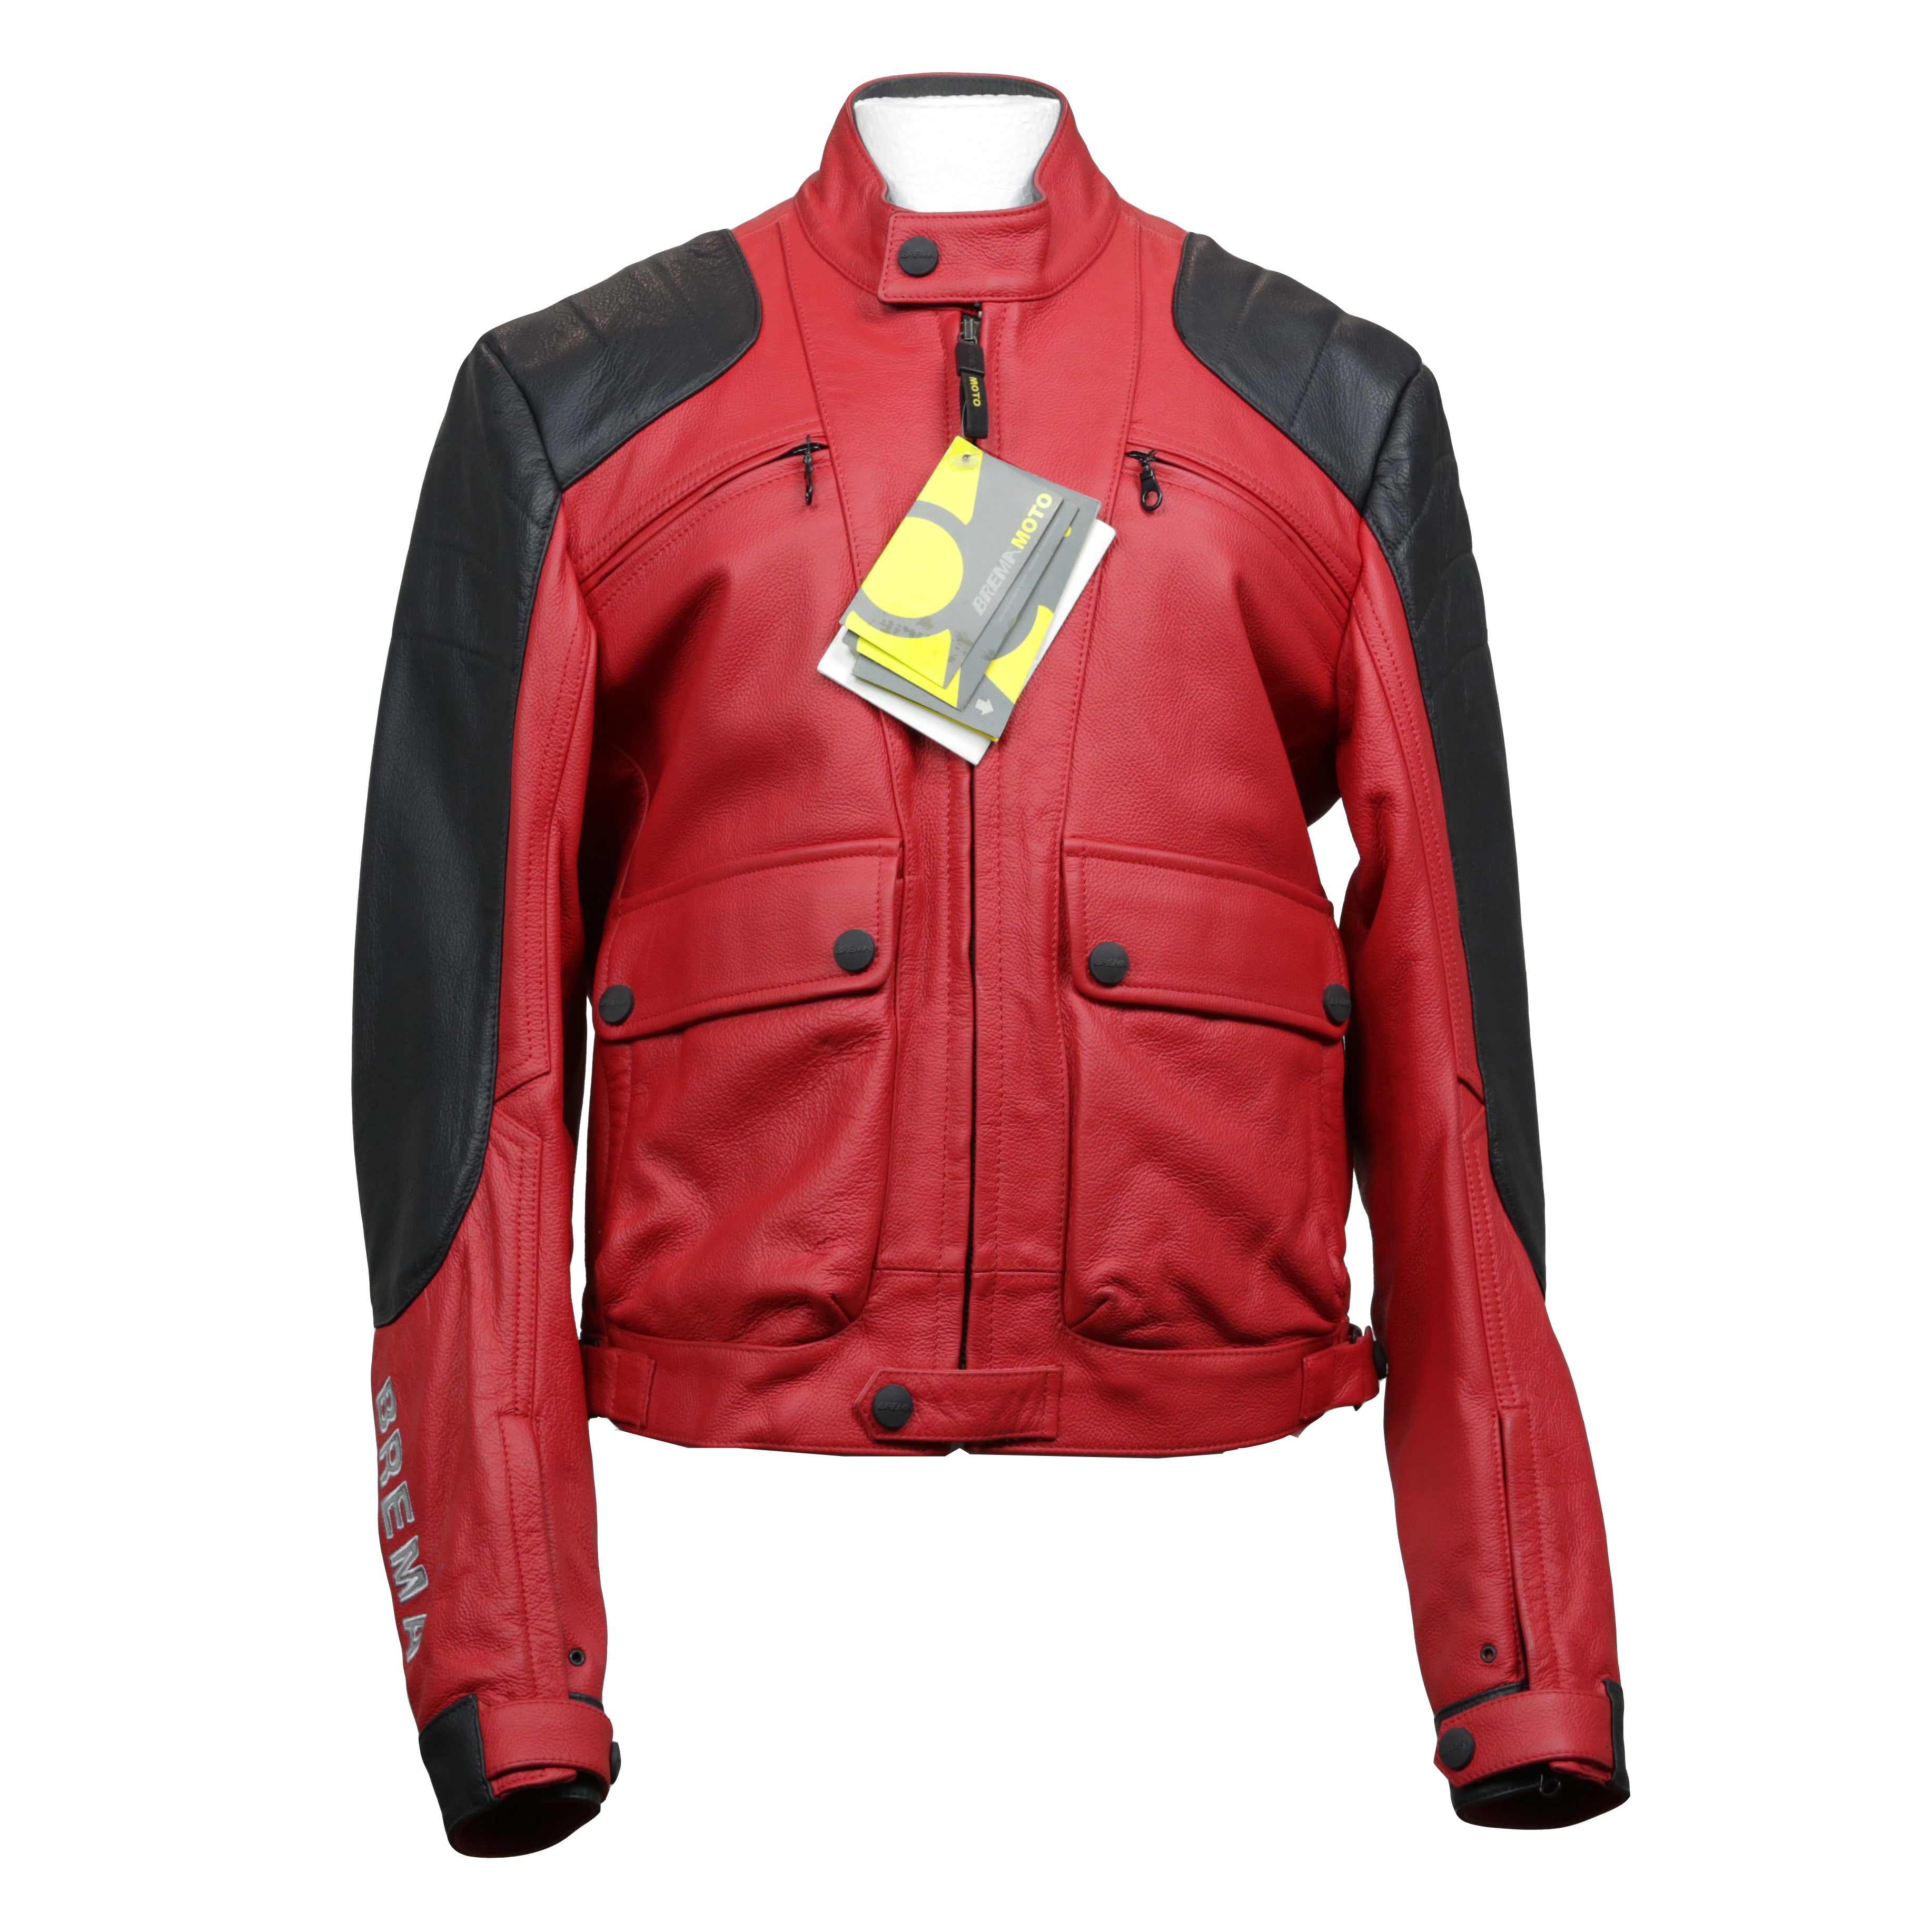 Brema Men's Leather Motorcycle Jacket - Red